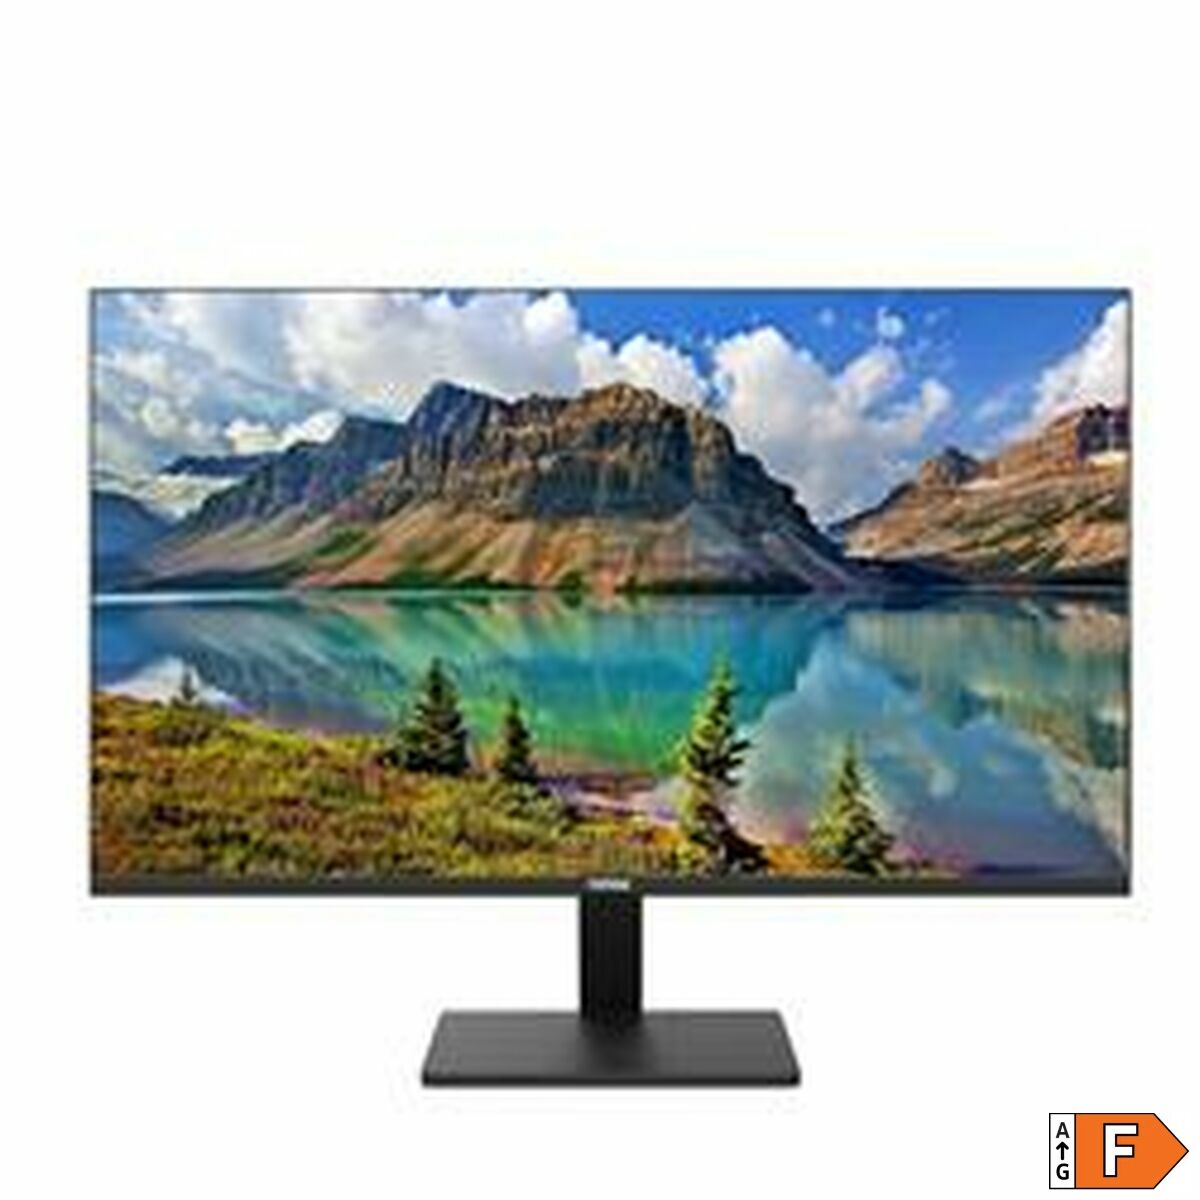 Monitor Nilox NXM27FHD21 27" IPS, Nilox, Computing, monitor-nilox-nxm27fhd21-27-ips, Brand_Nilox, category-reference-2609, category-reference-2642, category-reference-2644, category-reference-t-19685, category-reference-t-19902, computers / peripherals, Condition_NEW, office, Price_100 - 200, Teleworking, RiotNook